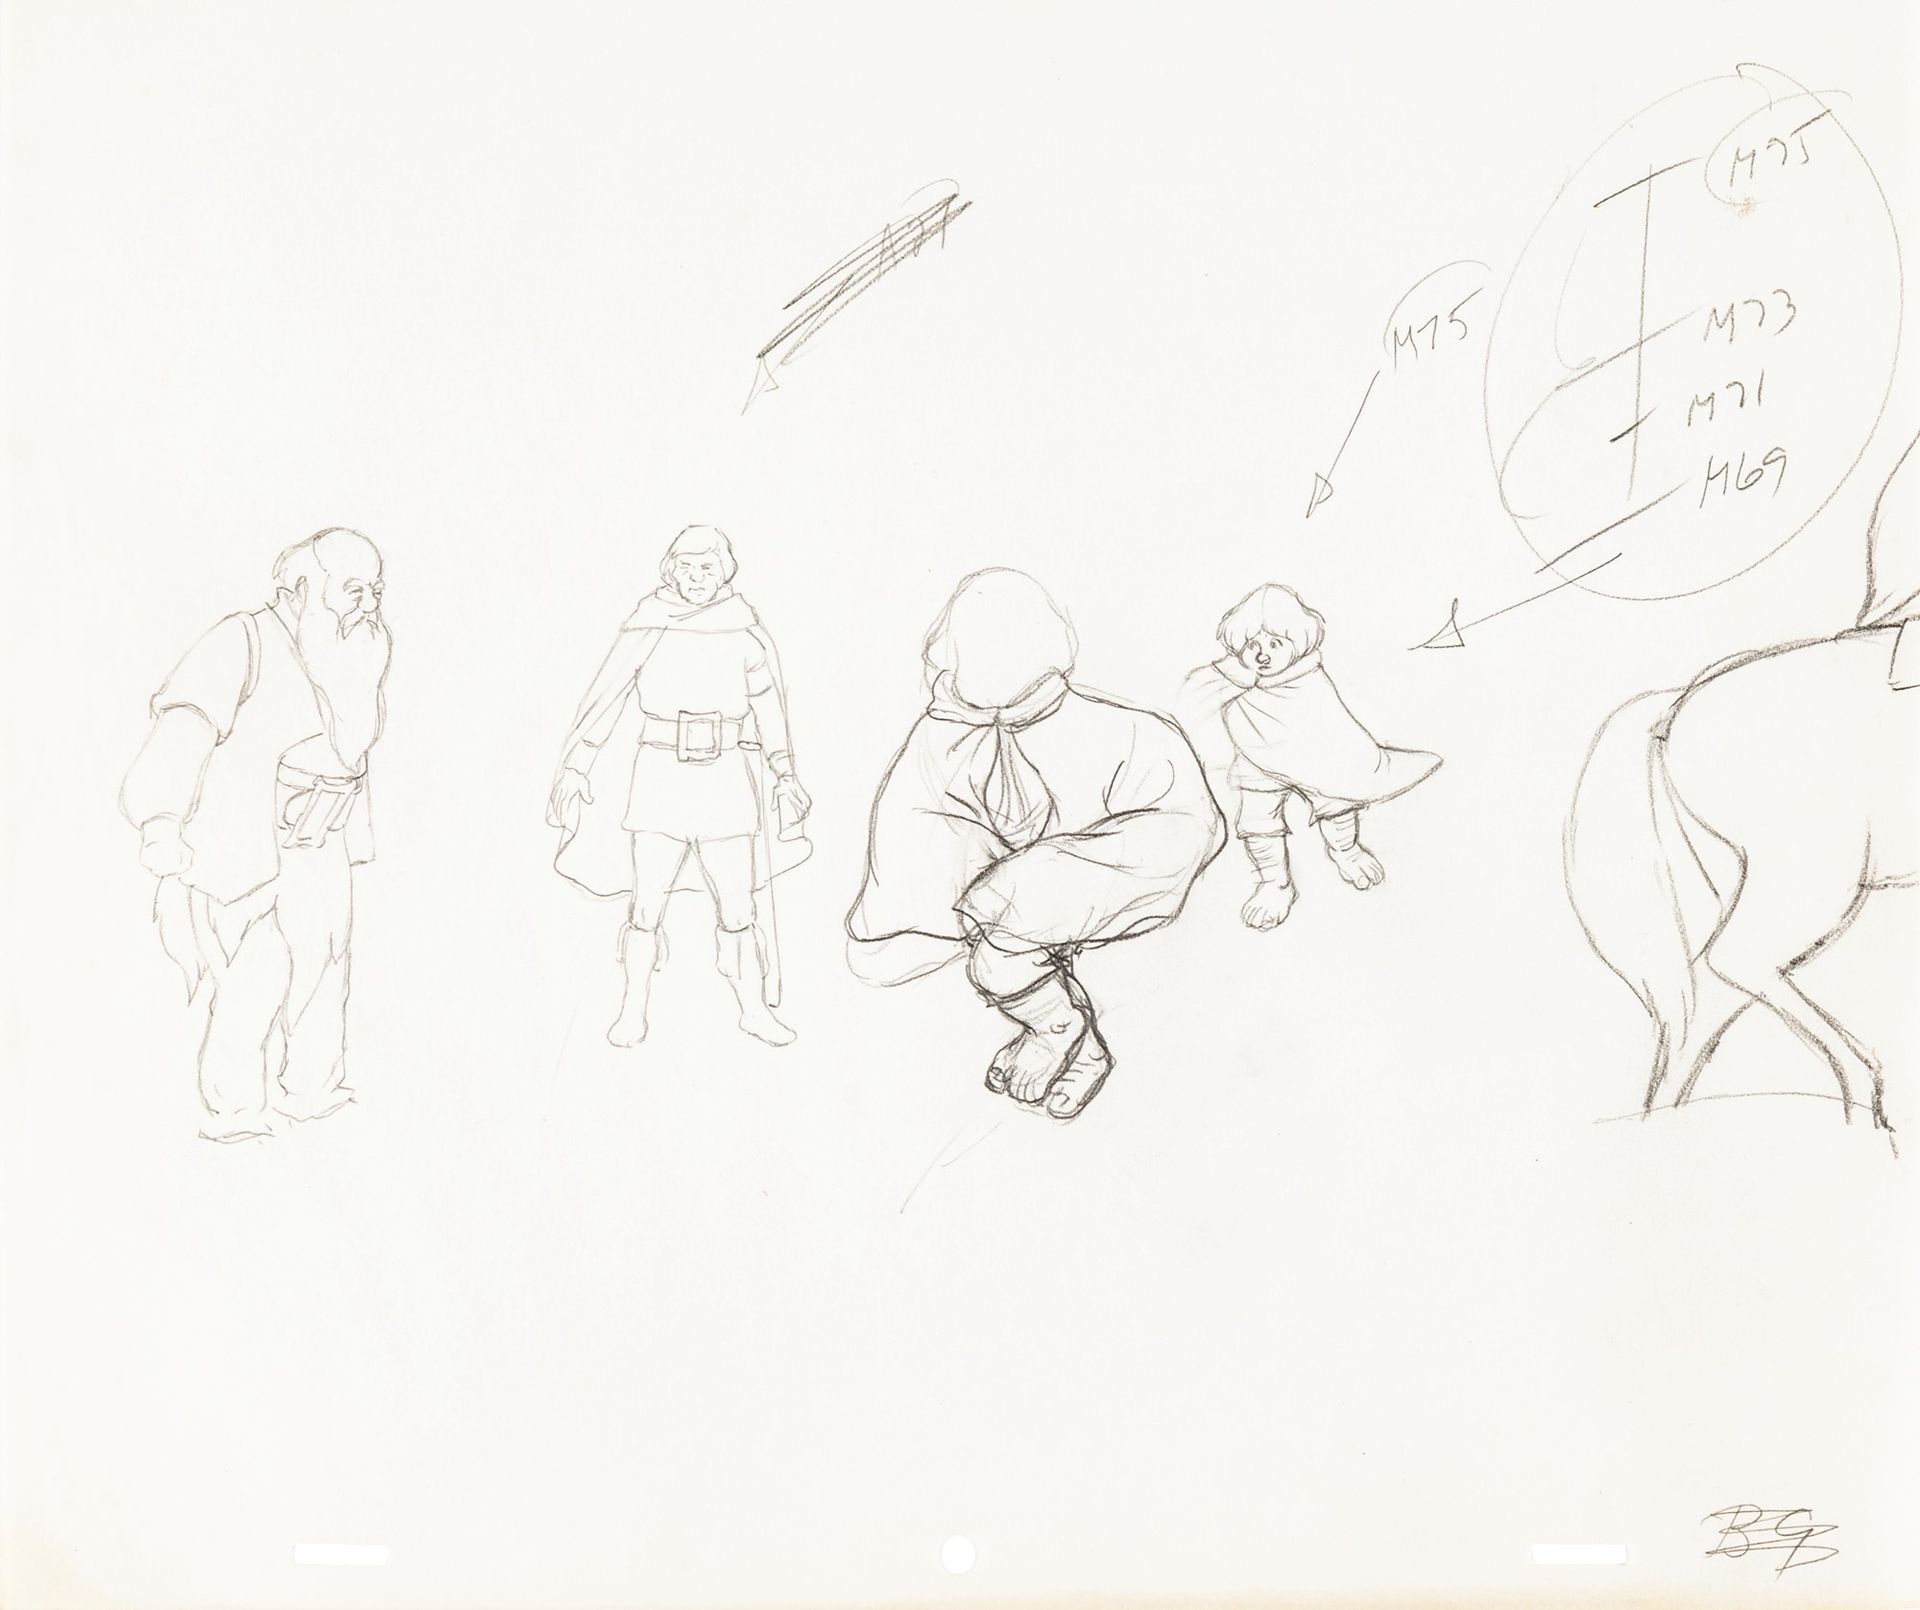 Studio Bakshi The Lord of the Rings, 1978

pencil on paper
31,5 x 27 cm
Producti&hellip;